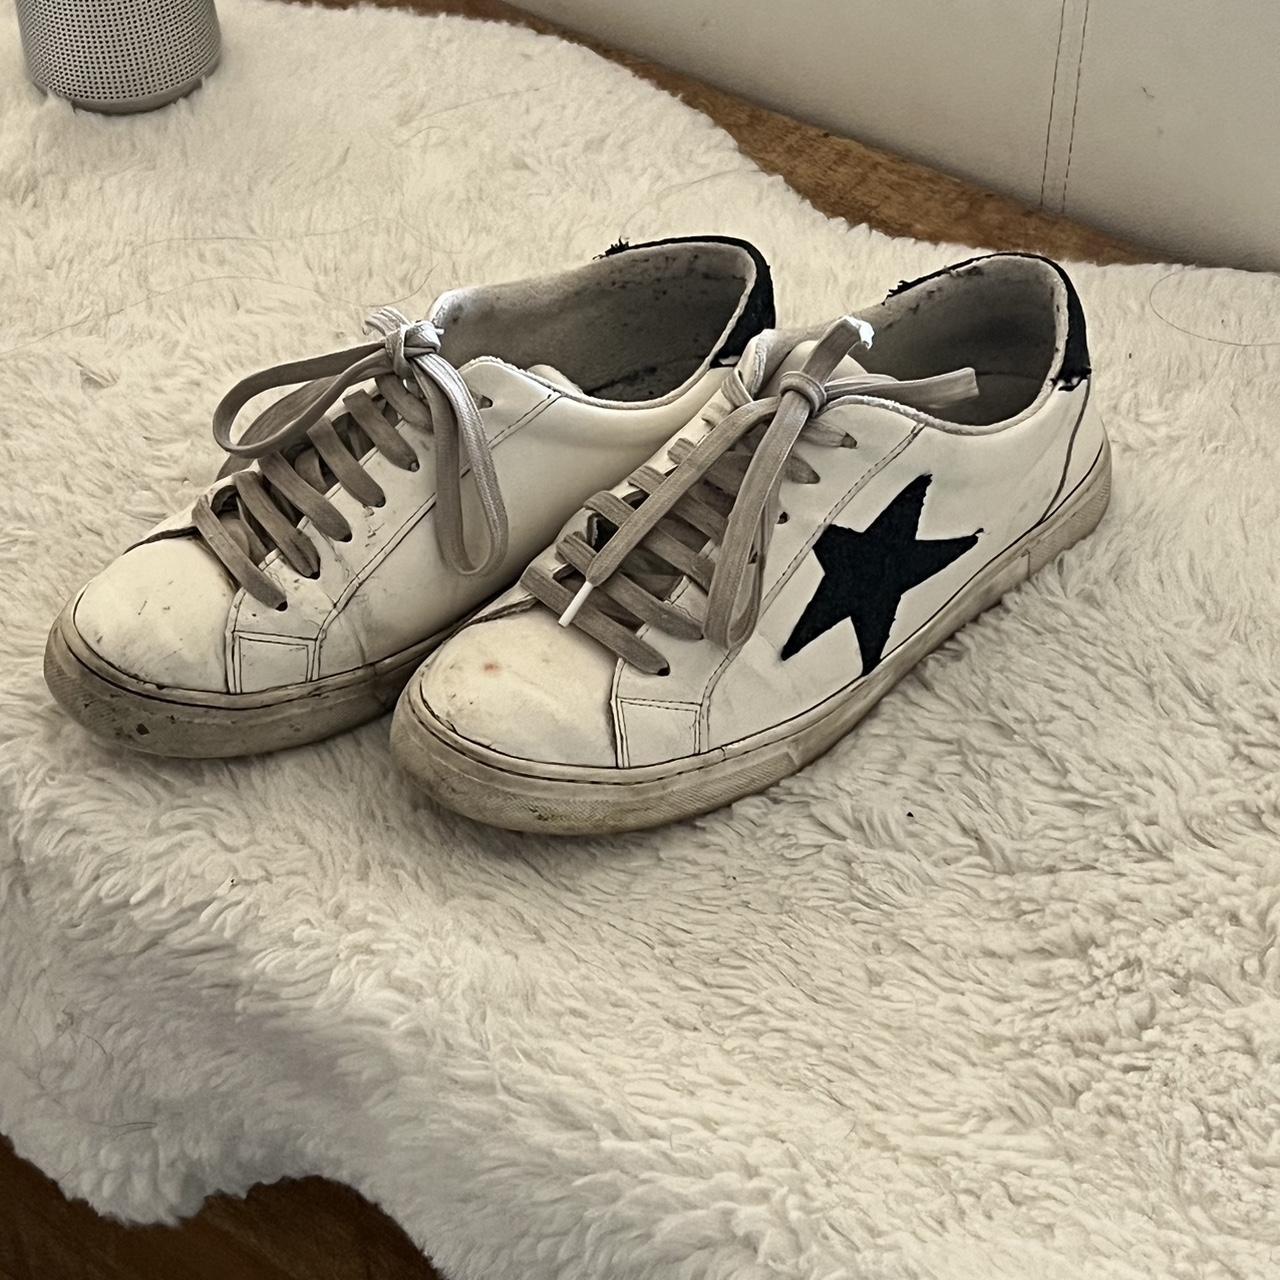 Golden Goose Women's Tan and White Trainers